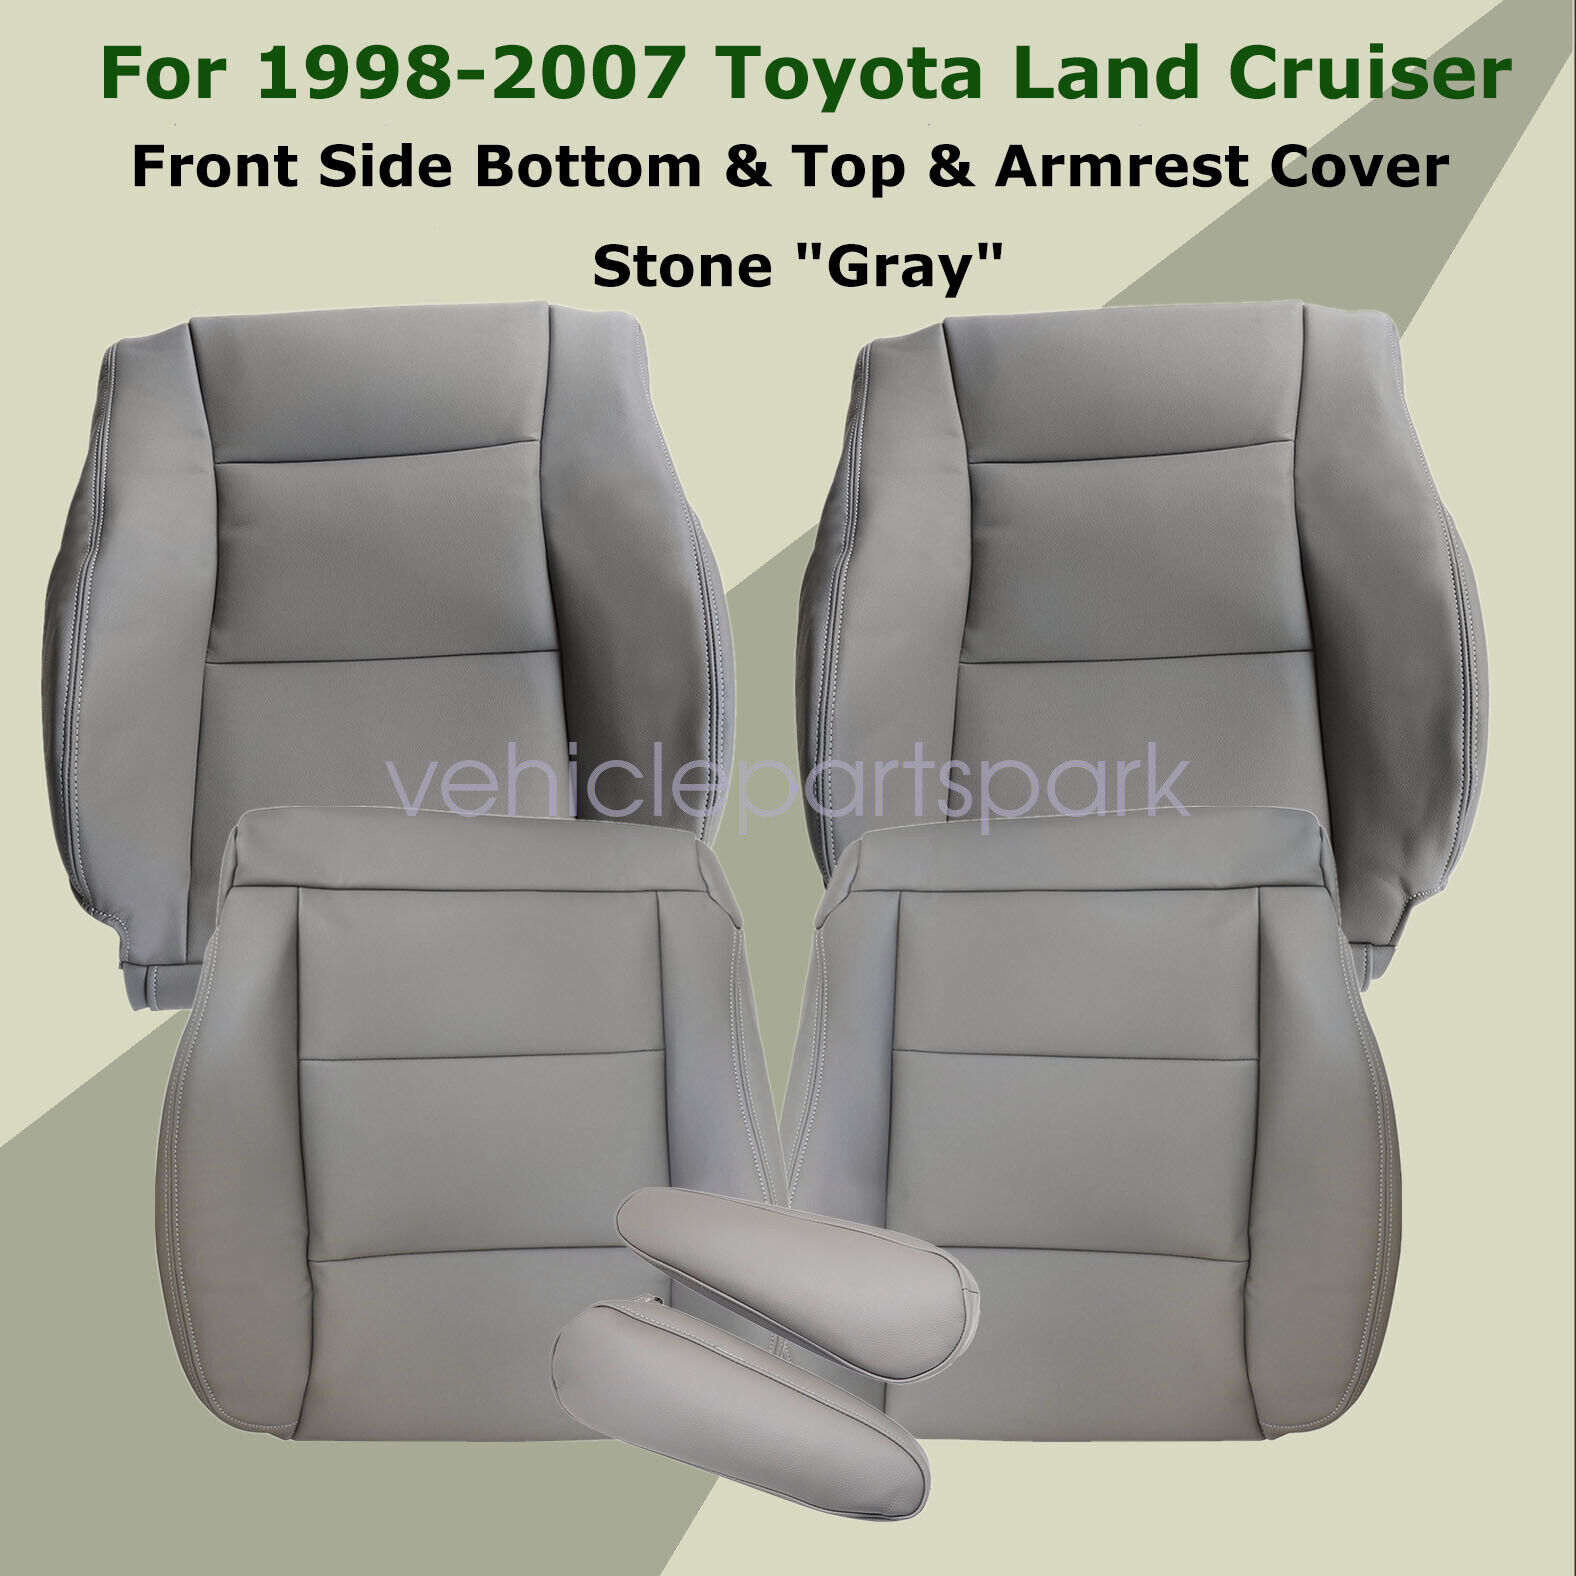 For 1998-2007 Toyota Land Cruiser Font Leather Seat Cover & Armrest Cover Gray